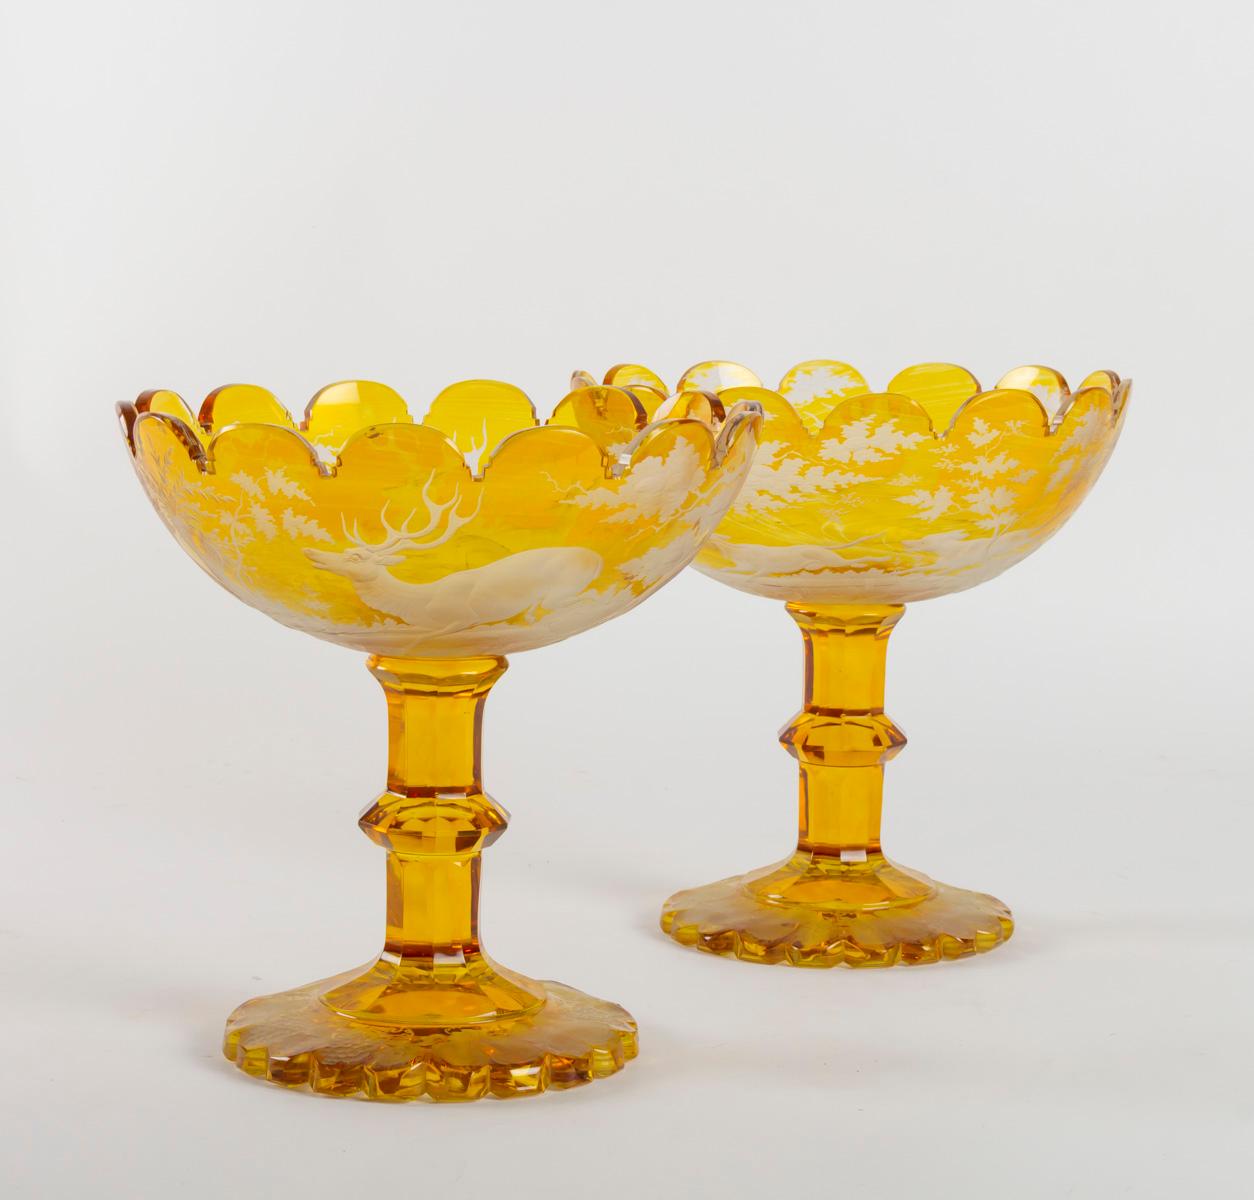 Pair of Bohemian crystal bowls engraved with hunting scenes, 19th century, Napoleon III.
Measures: H 23cm, D 22.